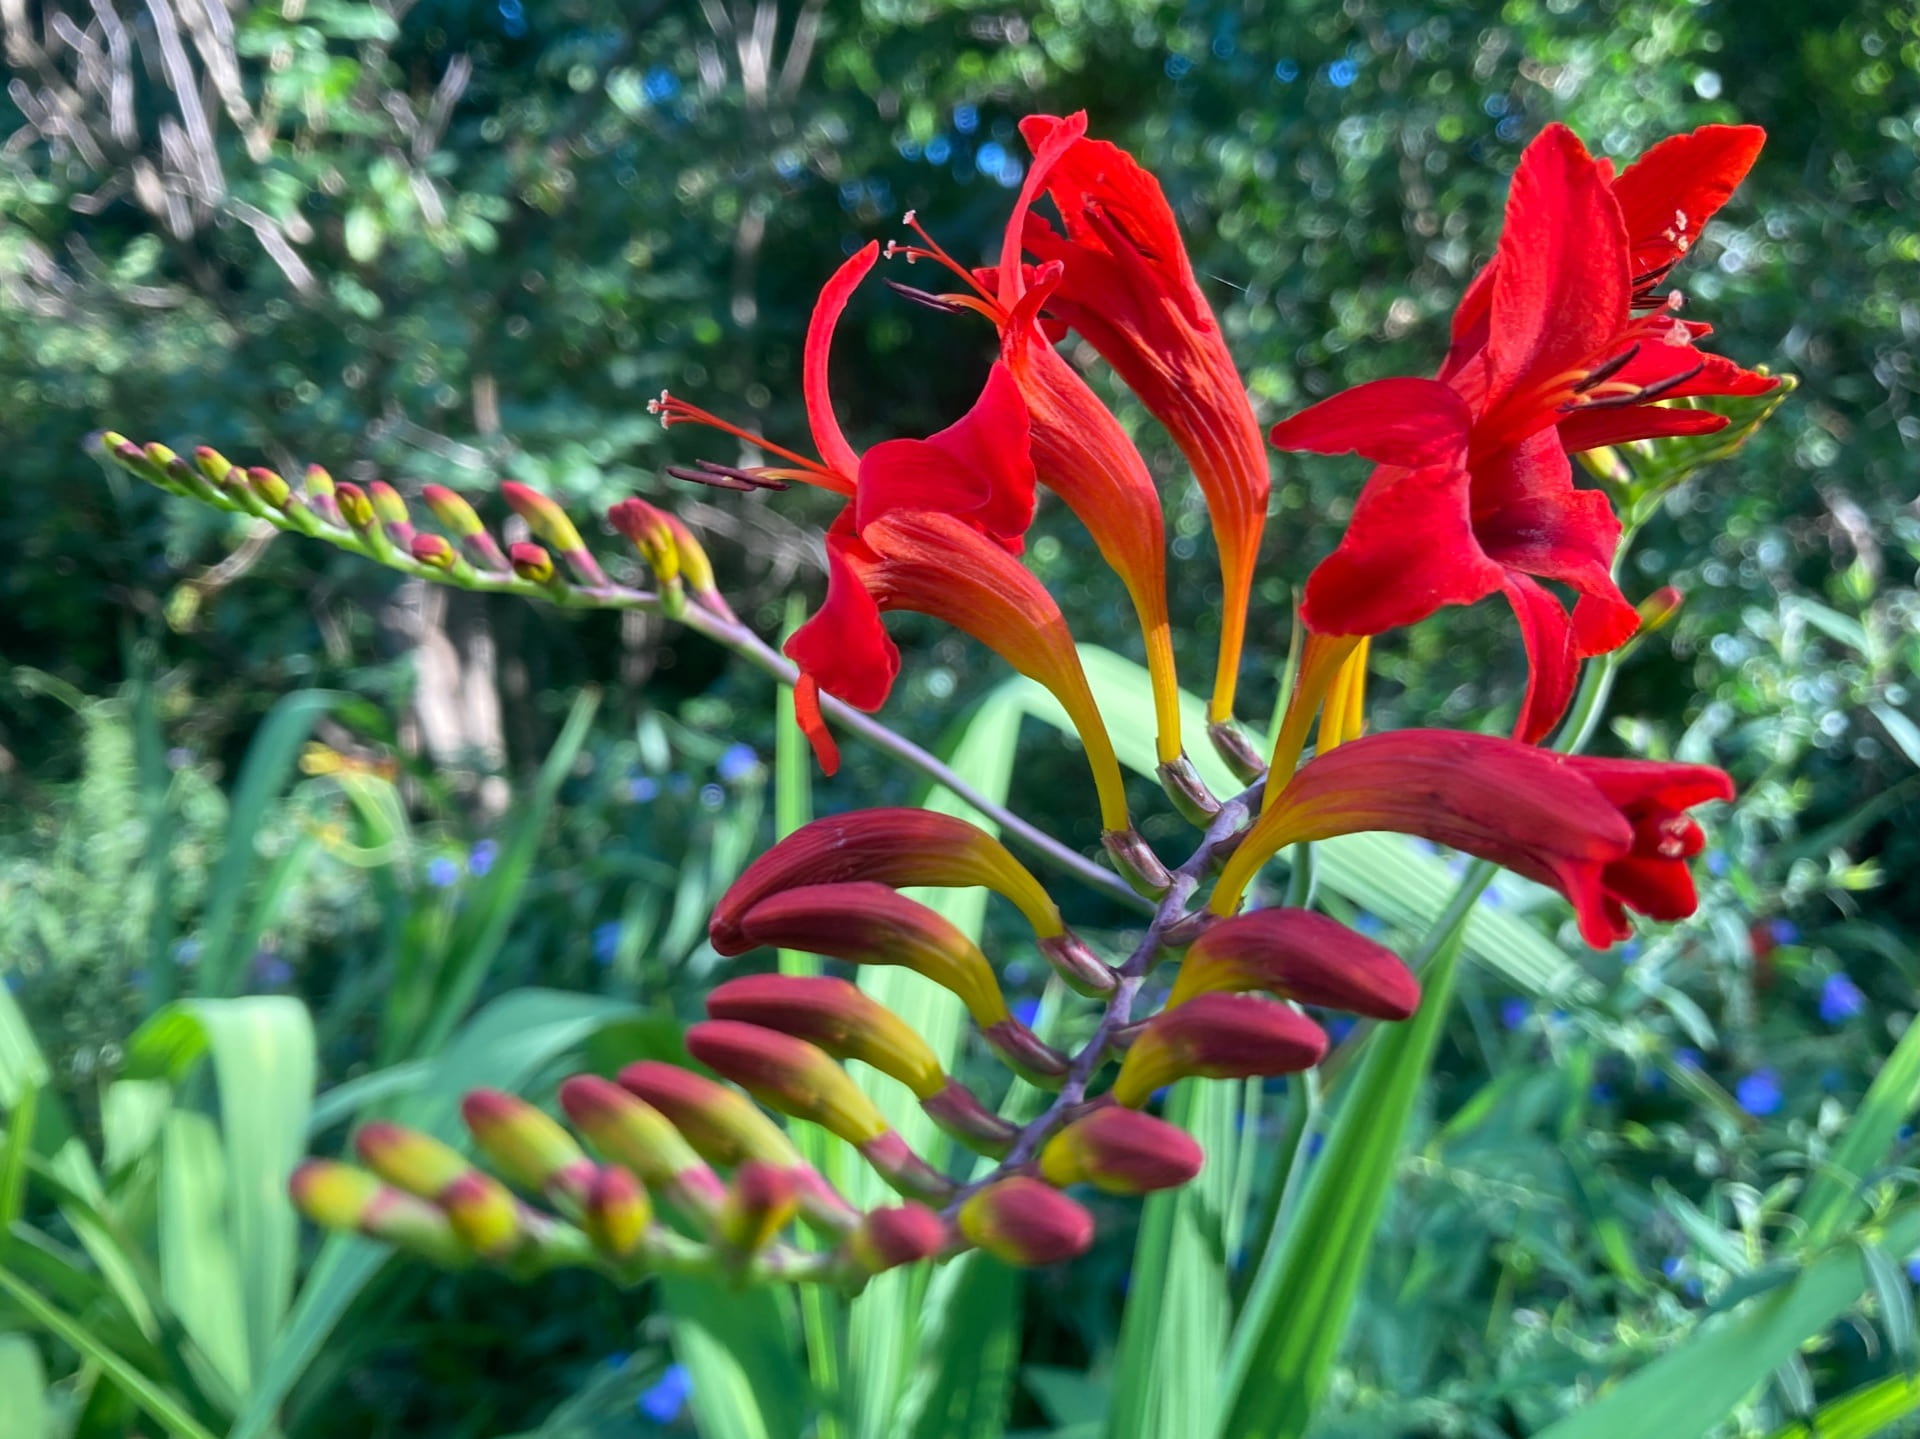 The electric flowers of Crocosmia 'Lucifer' light up the South Lawn.